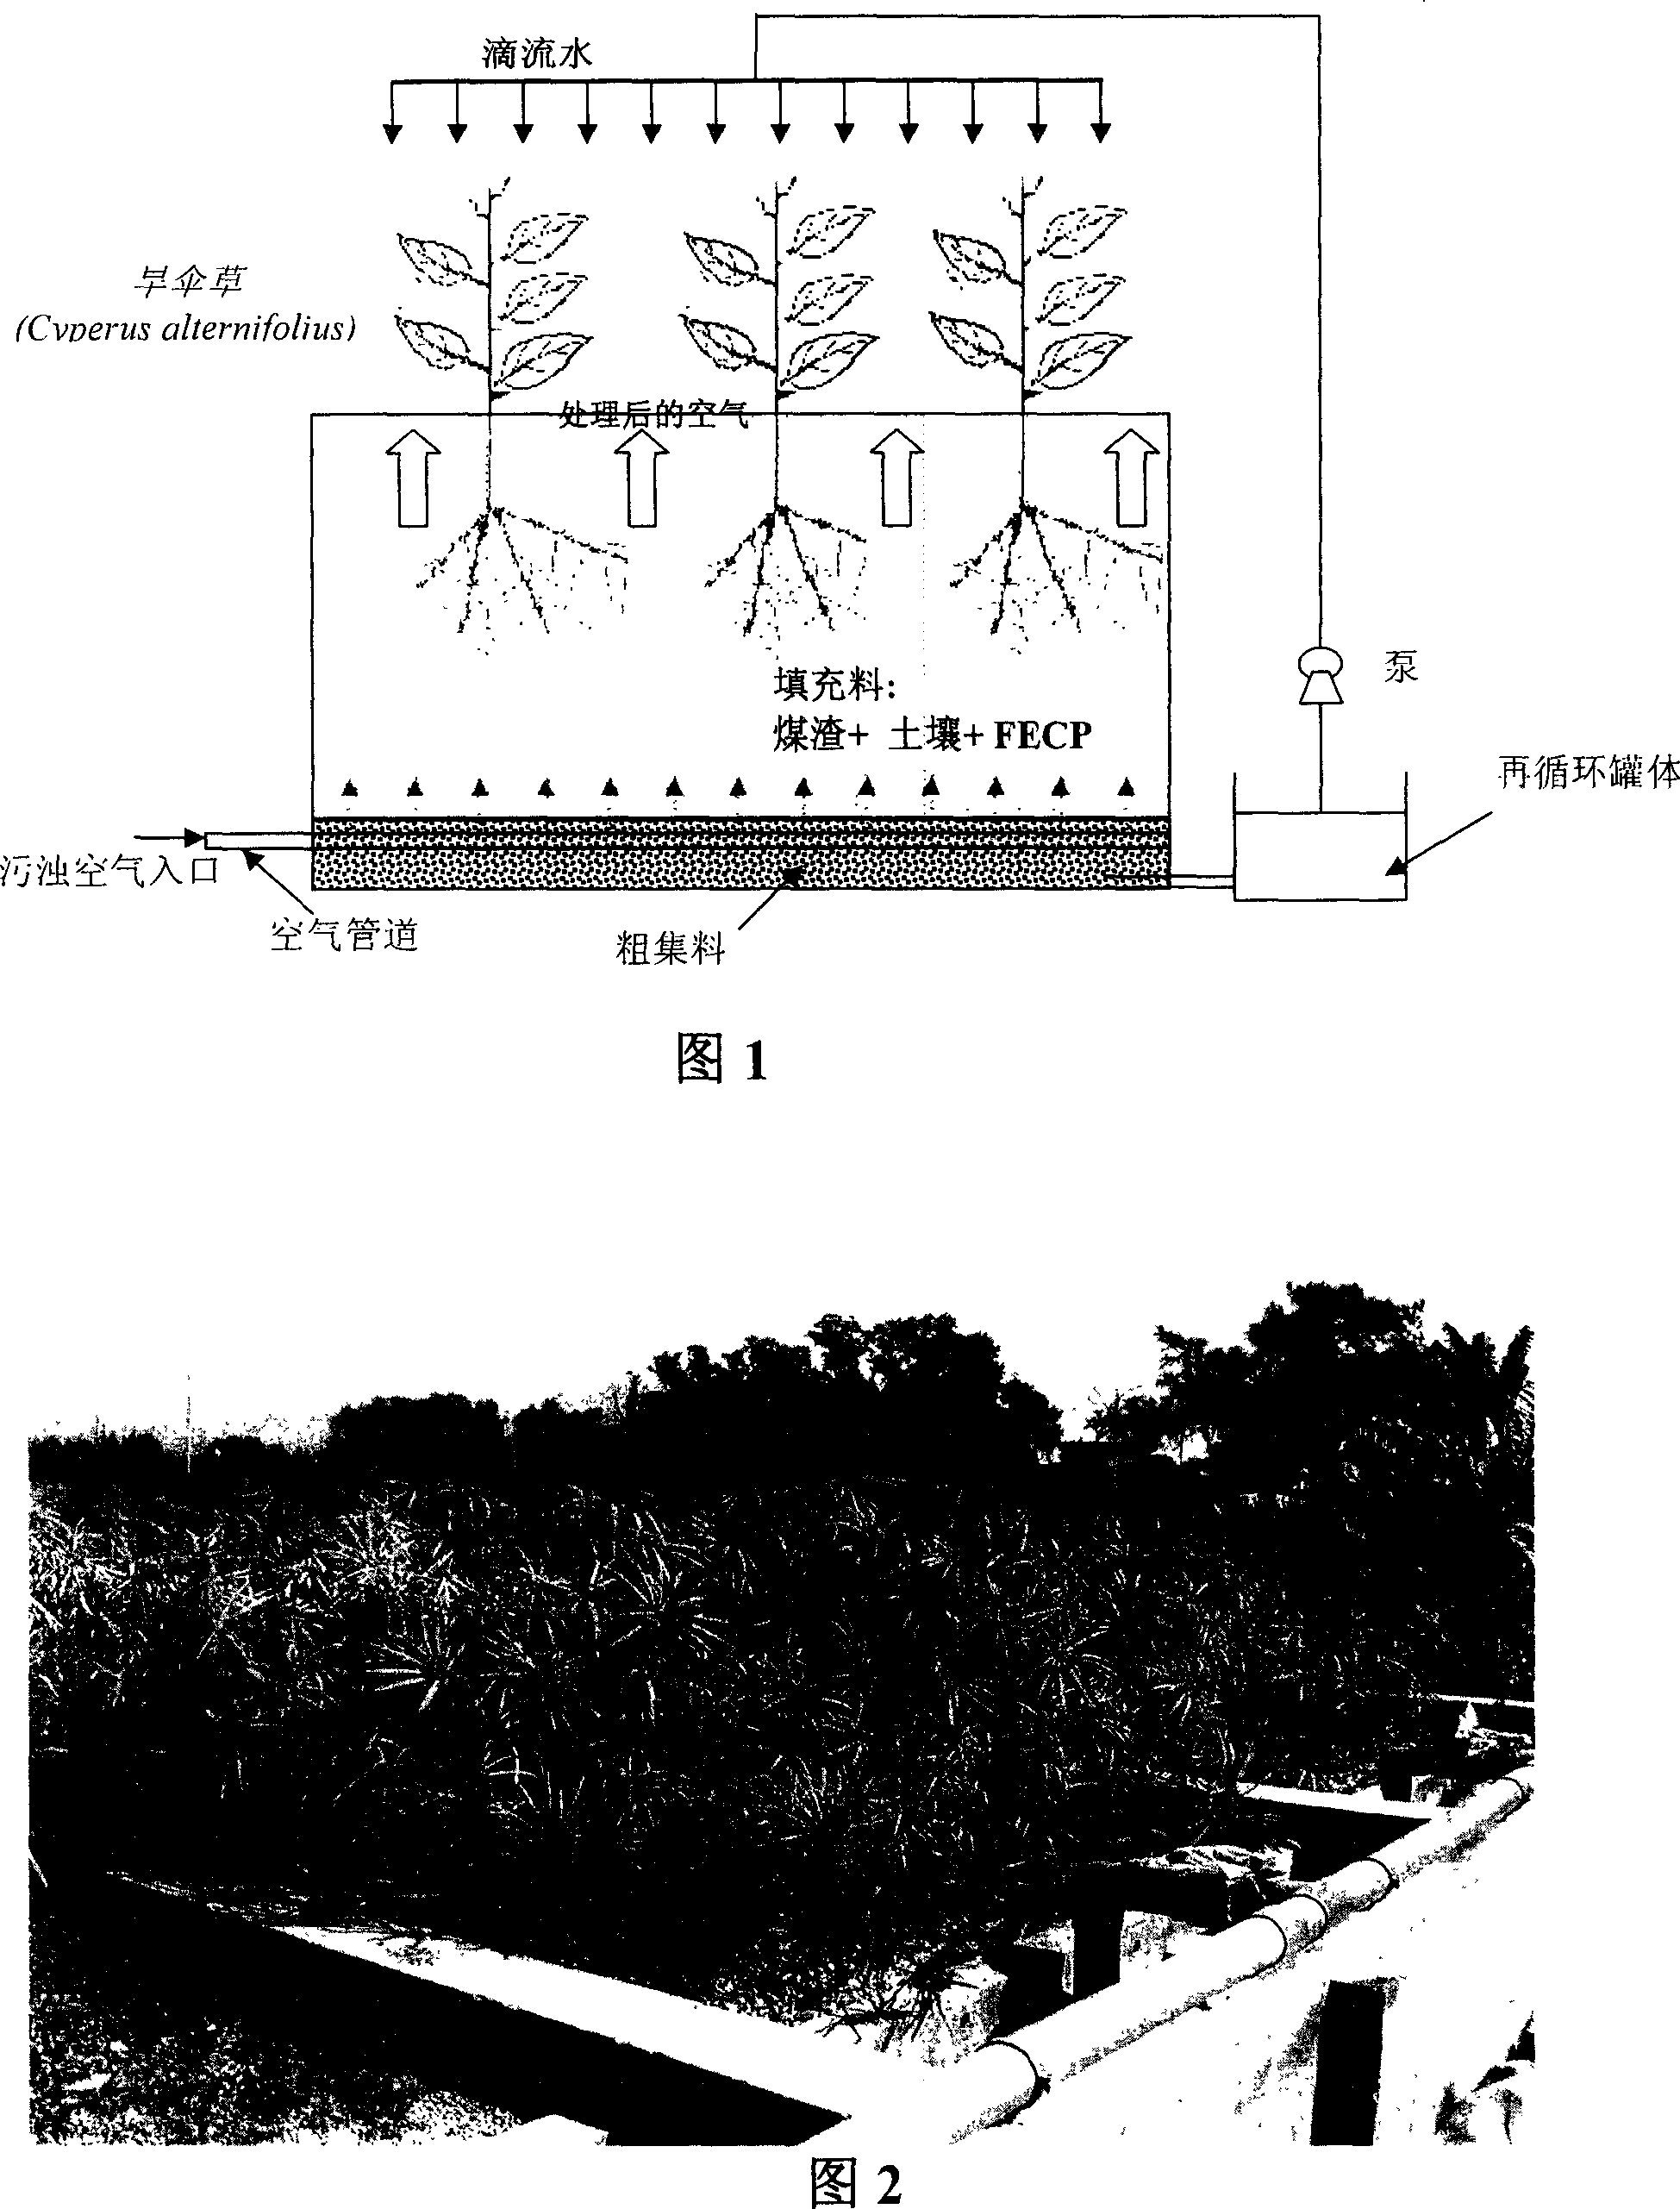 System for treating odour compound in dirty air and its method